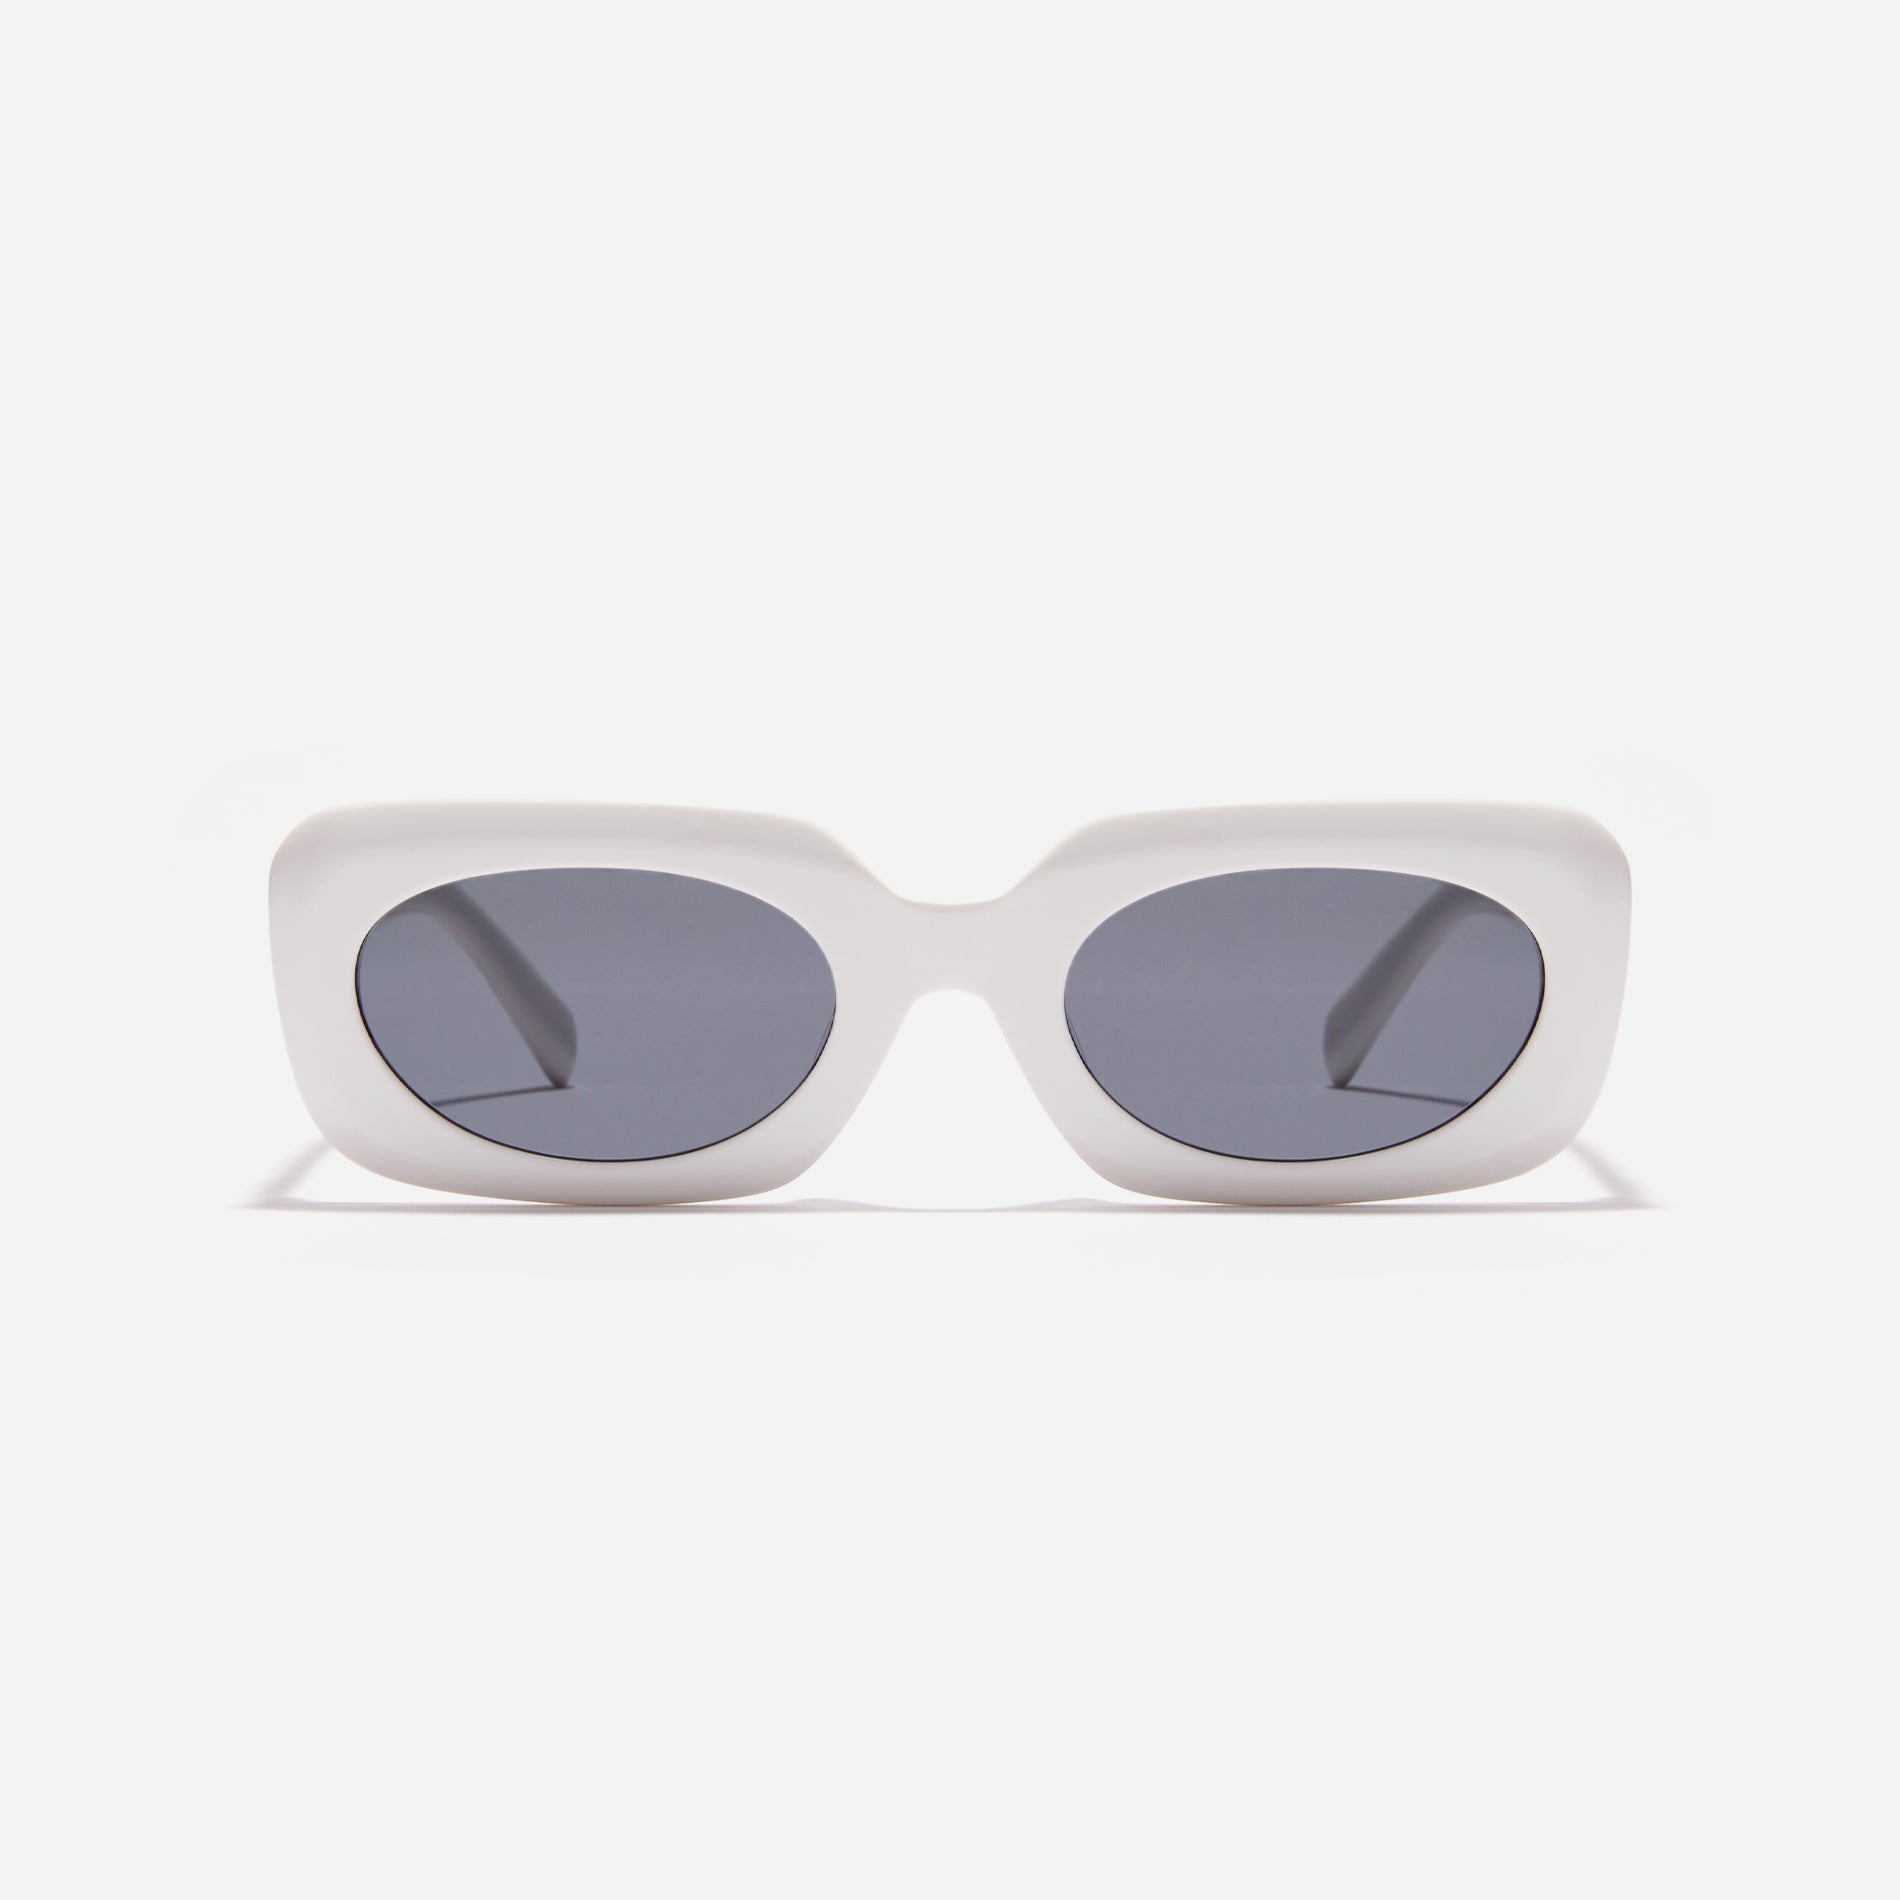 Born from the CARIN x OIOICOLLECTION collaboration, the ROUND sunglasses are designed with a sleek narrow rim style that gives a modern twist to the '90s retro vibe. The temples showcase a newly redesigned OIC logo emblem, highlighted by a soft color palette, adding a touch of fashion-forward style.